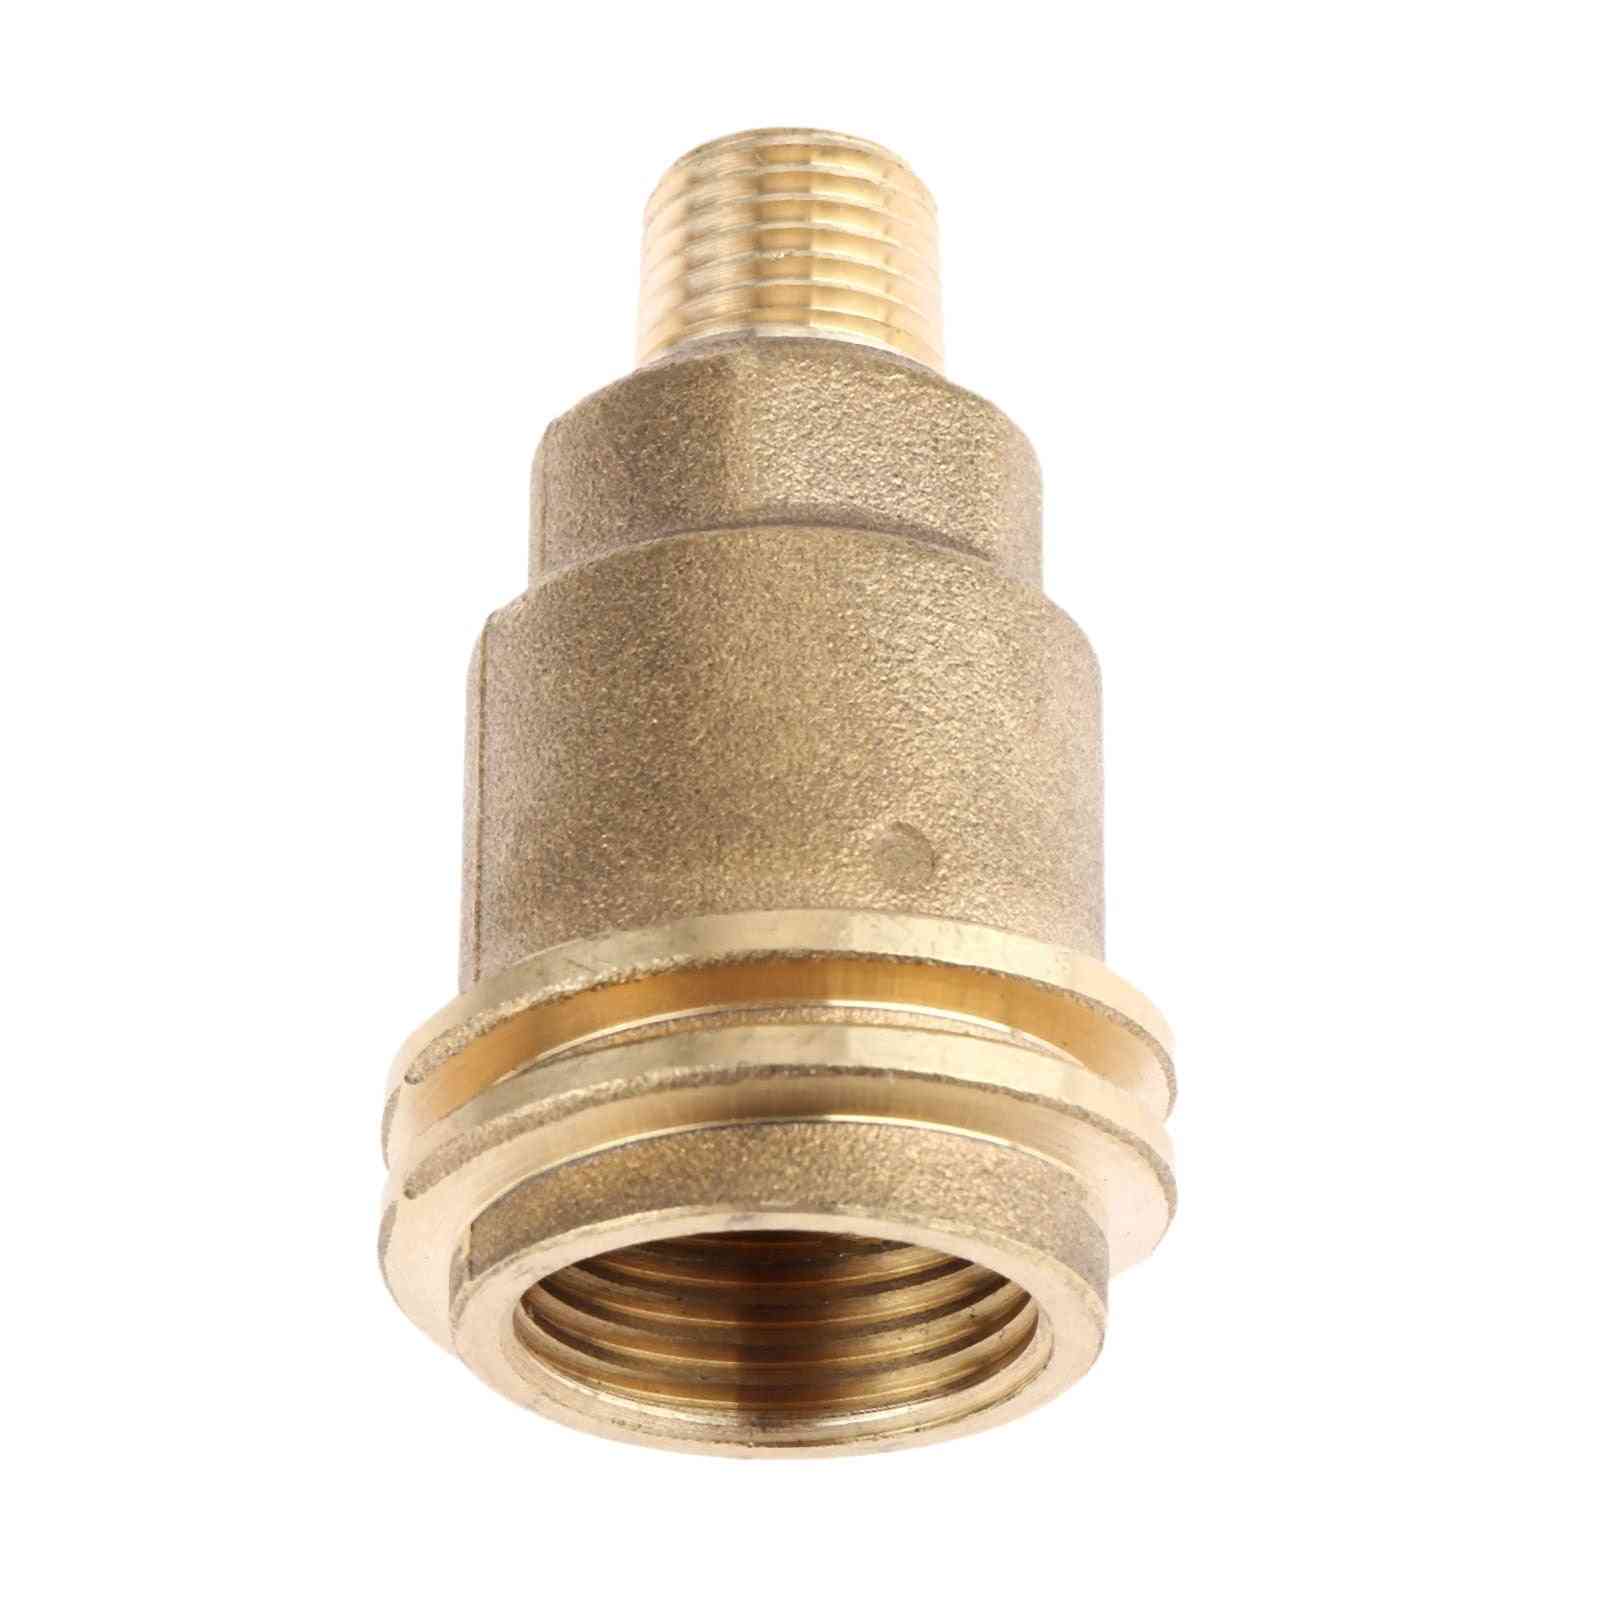 Brass Pipe Thread Adapter(male Qcc-1 To 1/4-inch Male).